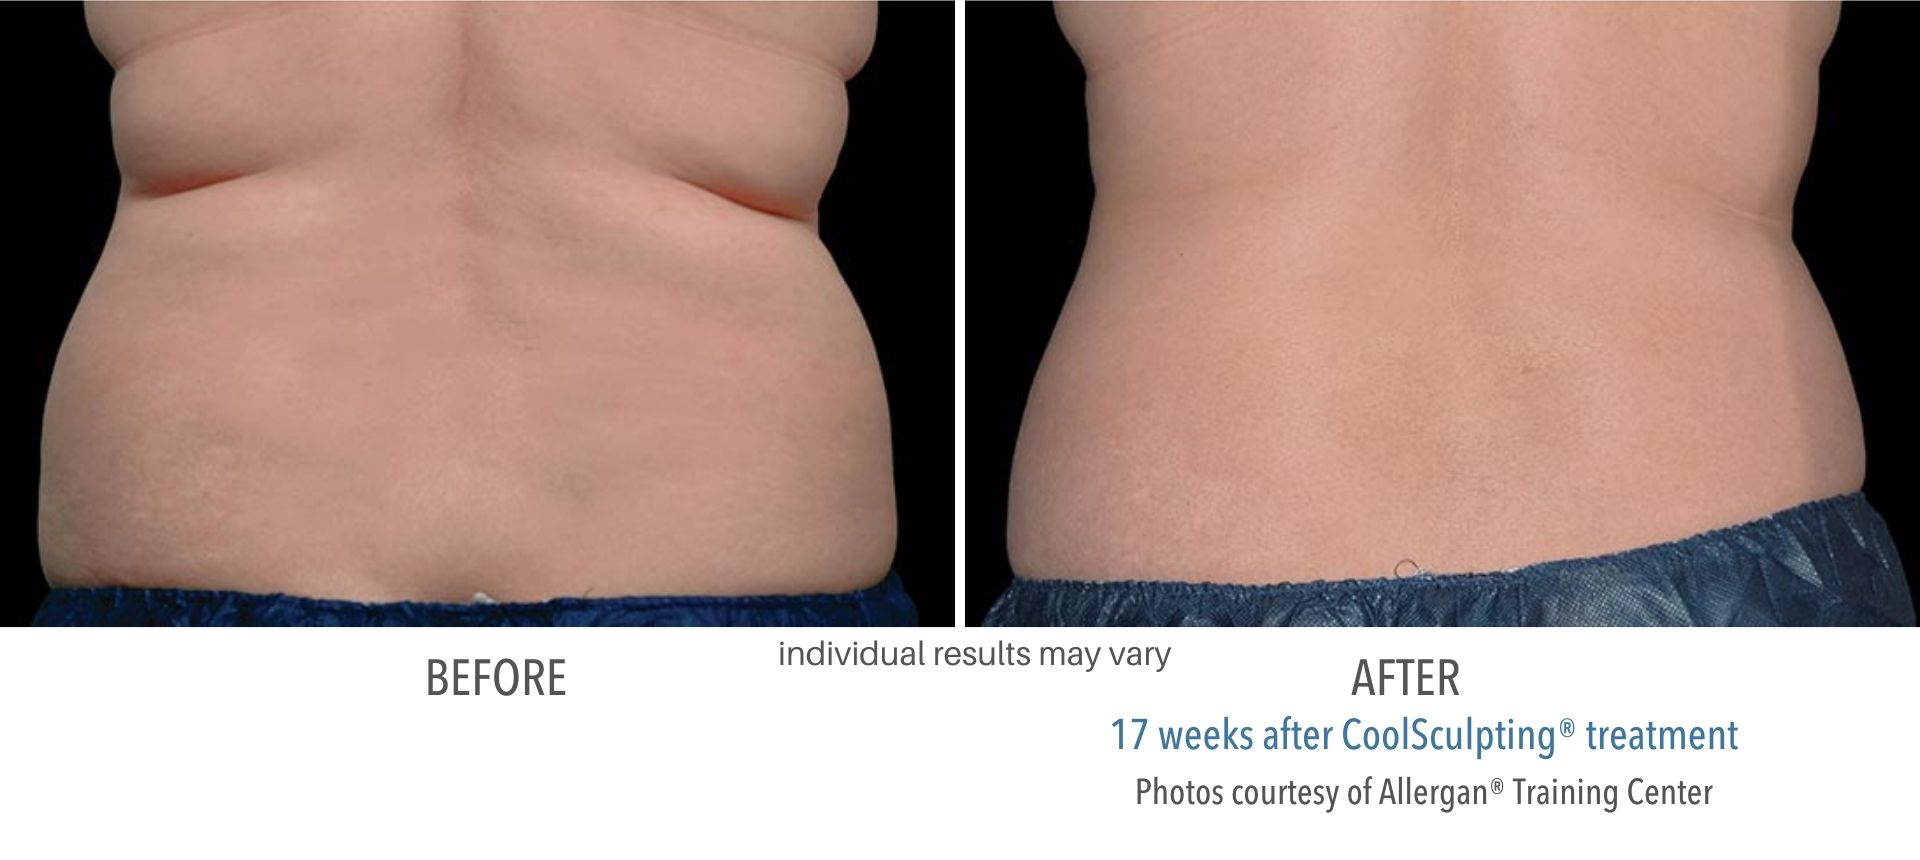 CoolSculpting before and after images of actual patients